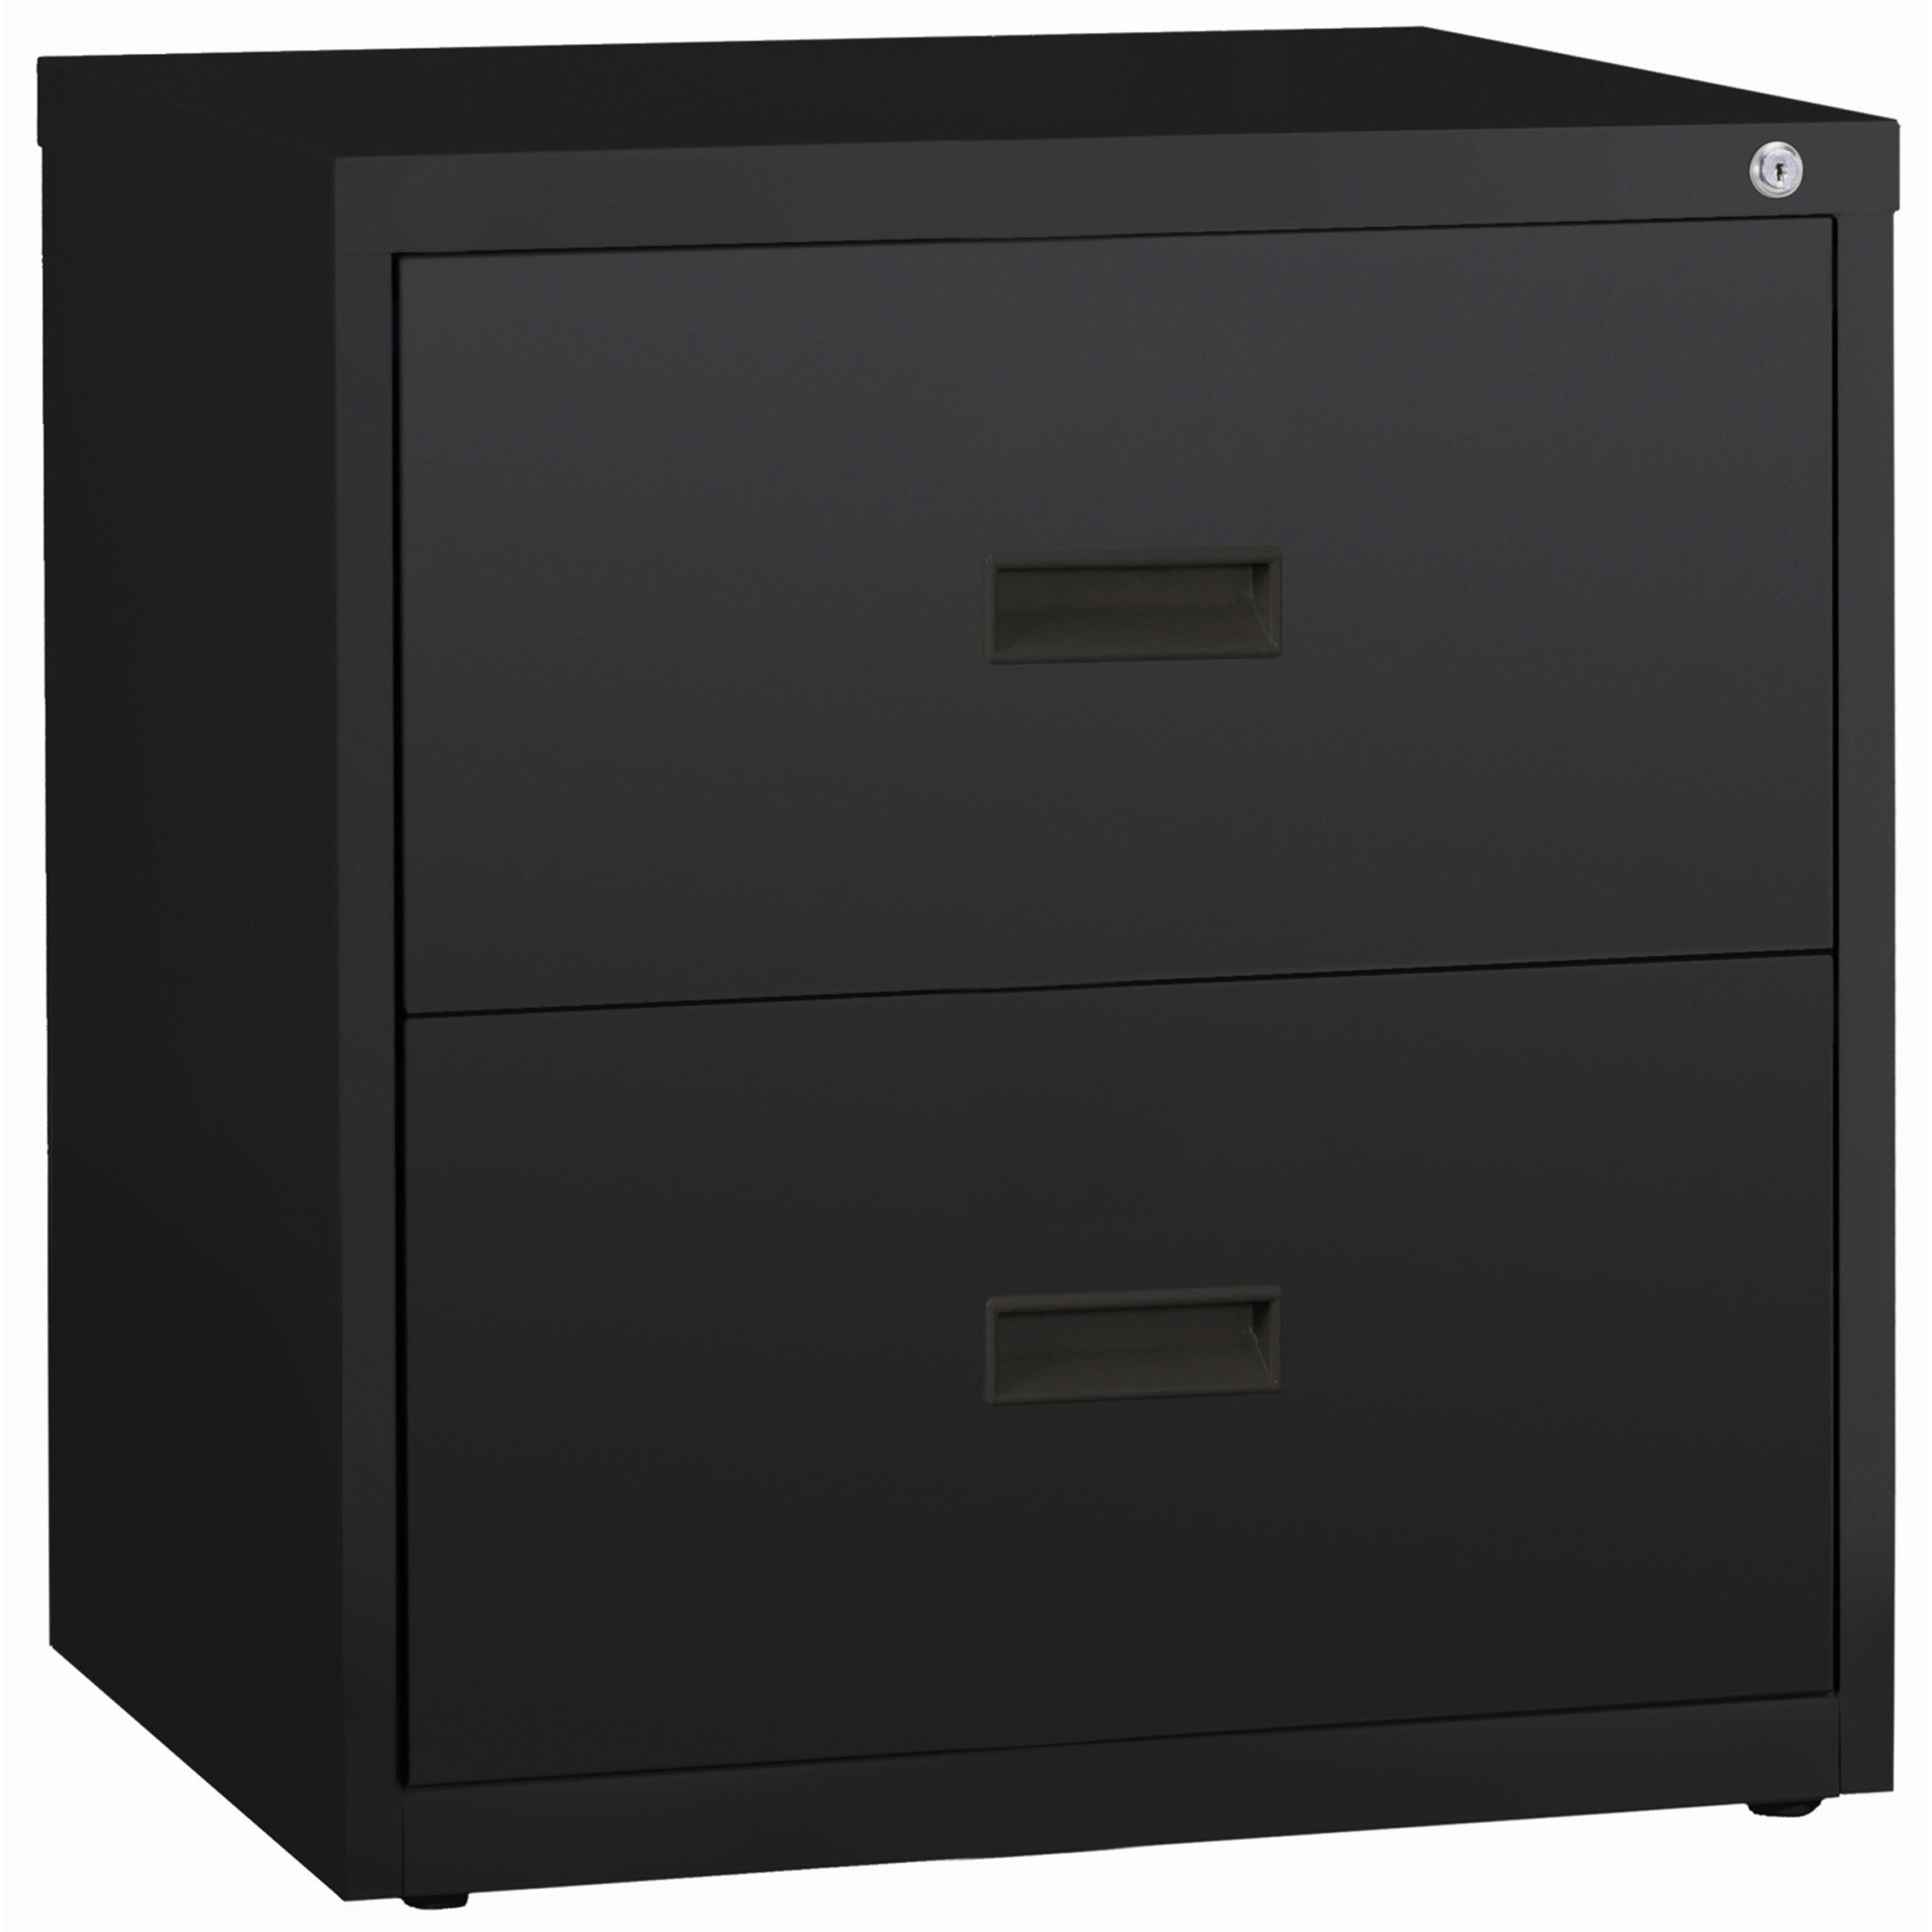 Lorell Value Lateral File - 2-Drawer - 30" x 18.6" x 28.1" - 2 x Drawer(s) for File - A4, Letter, Legal - Interlocking, Ball-bearing Suspension, Adjustable Glide, Locking Drawer - Black - Steel - Recycled - 